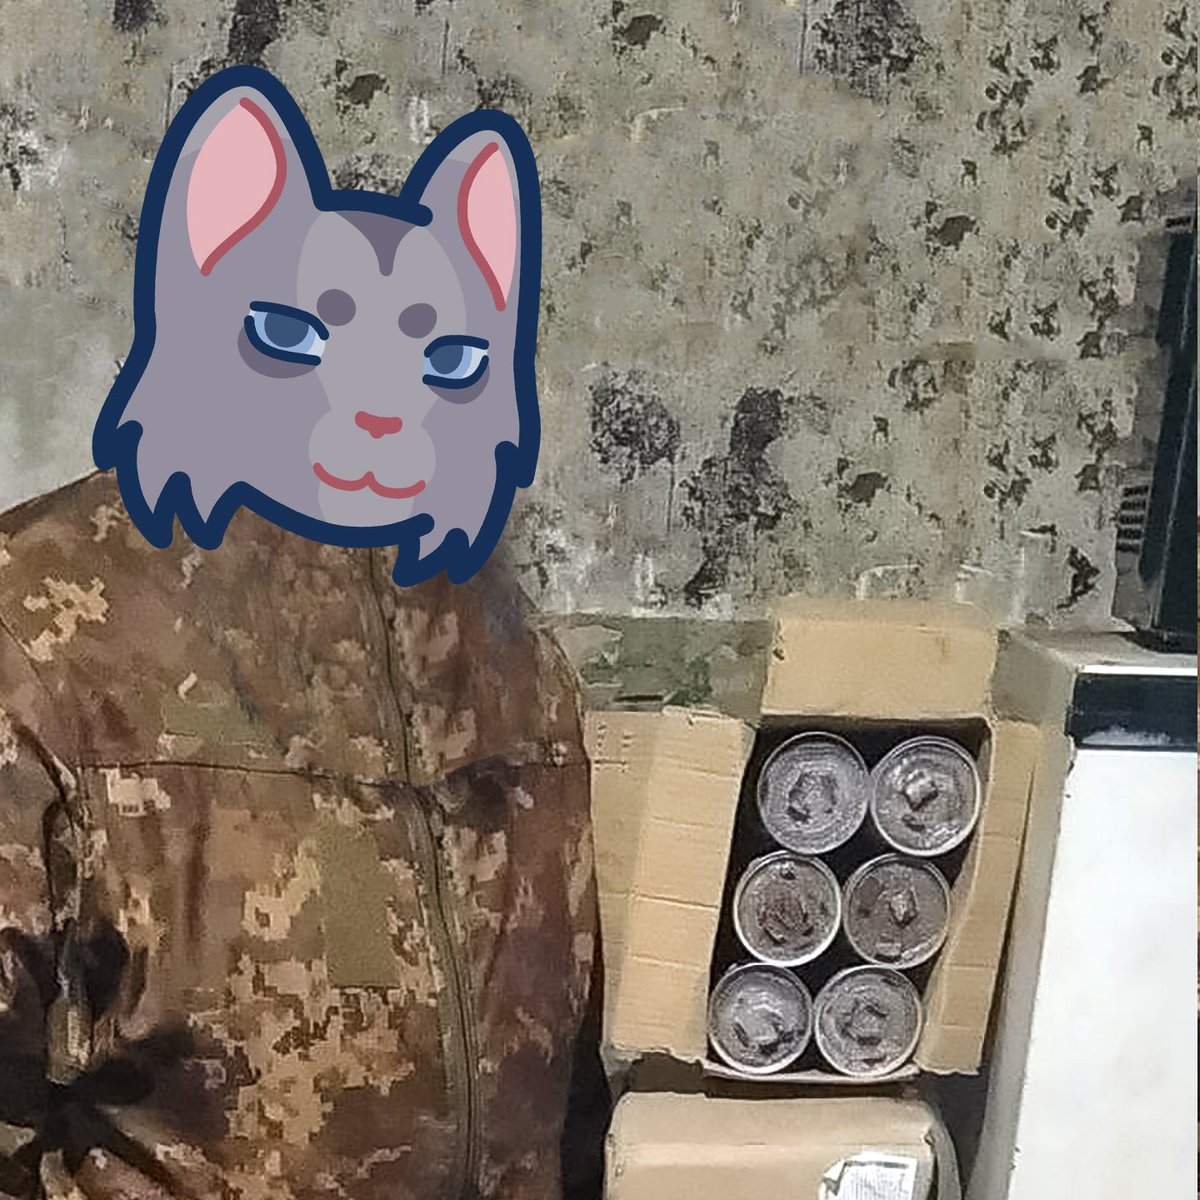 Combat #medic on #Bakhmut received a pack of warmth.
During the cold season, we sent a lot of #trenchcandles but not all reports were published. We will continue sharing them during this month.
Support:
PP alpenhogs@te.net.ua - #candles/#balms
#UkraineWar #UkraineWillWin #UAarmy